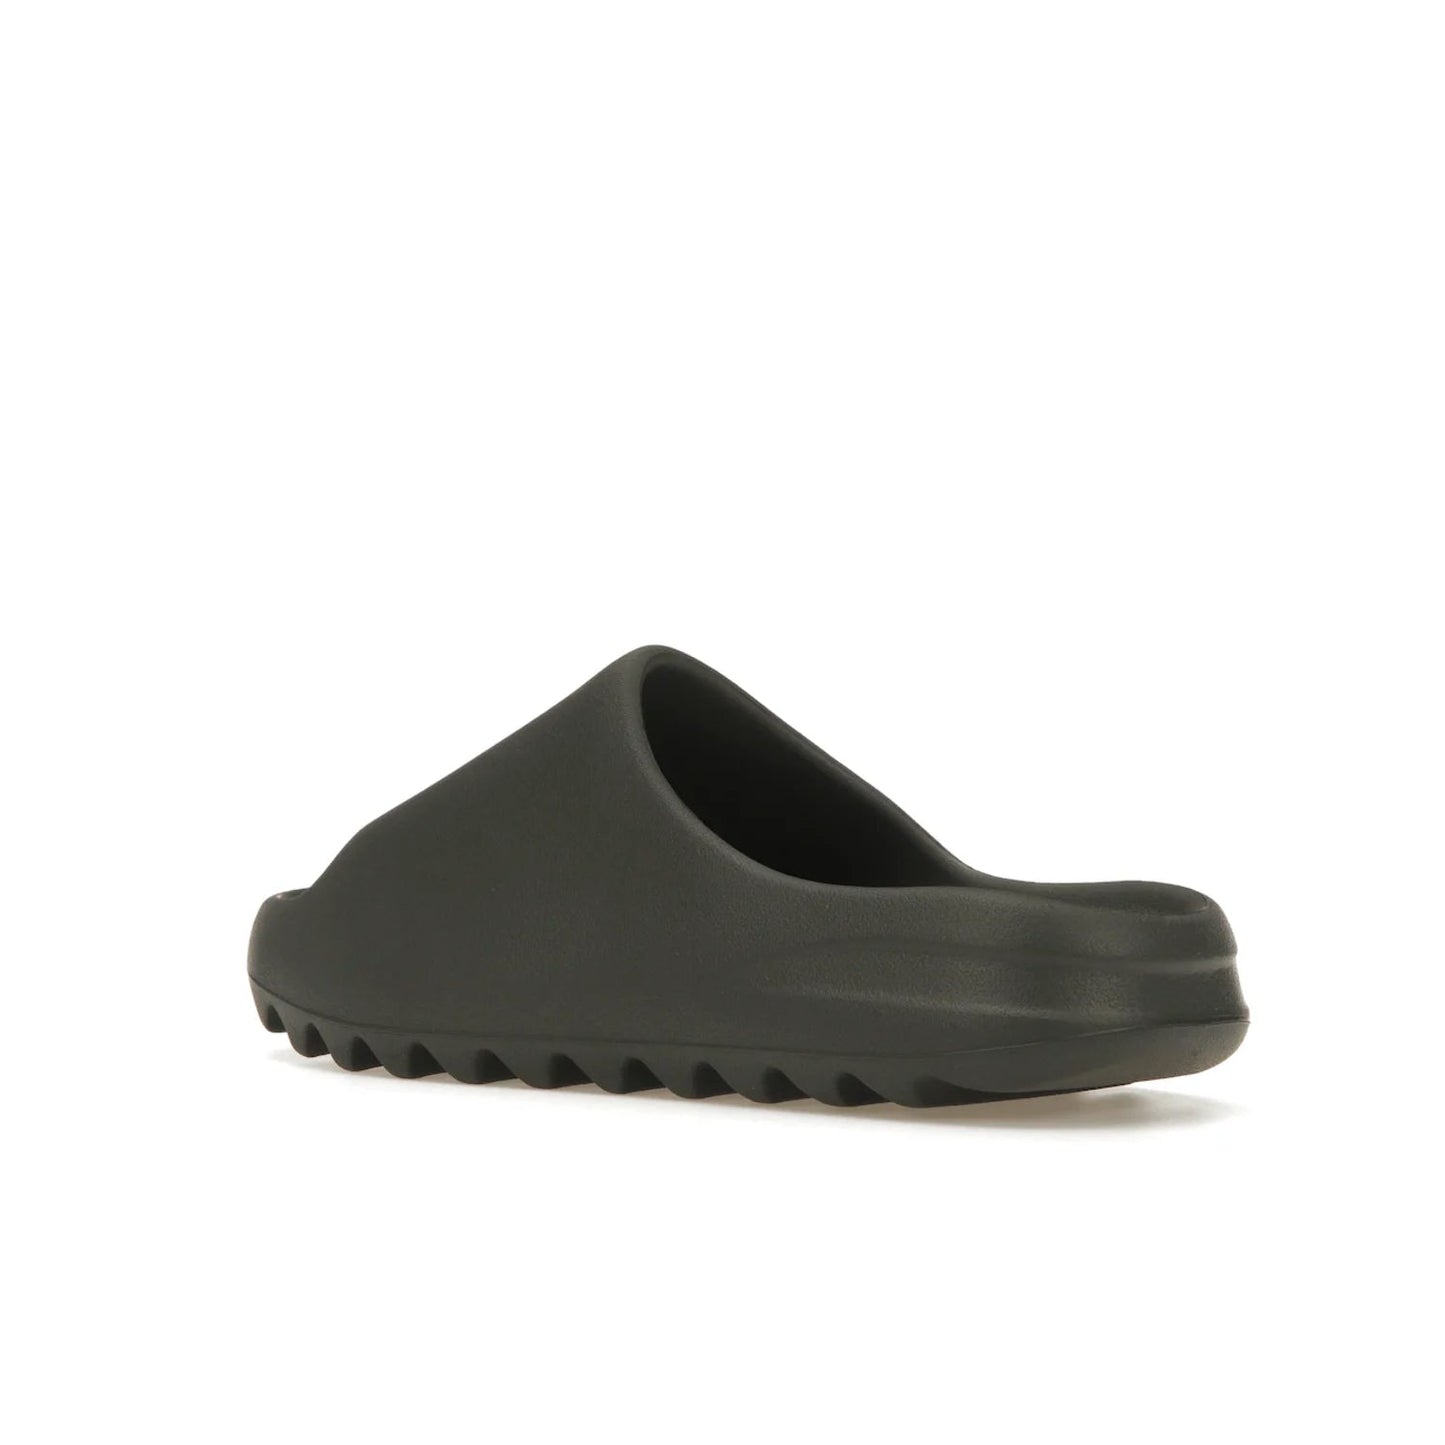 adidas Yeezy Slide Granite - Image 23 - Only at www.BallersClubKickz.com - Introducing the adidas Yeezy Slide Granite with a sleek, soft-to-touch one-piece upper – perfect for making a statement with its minimalistic design and luxurious comfort. Get yours now for only $70.